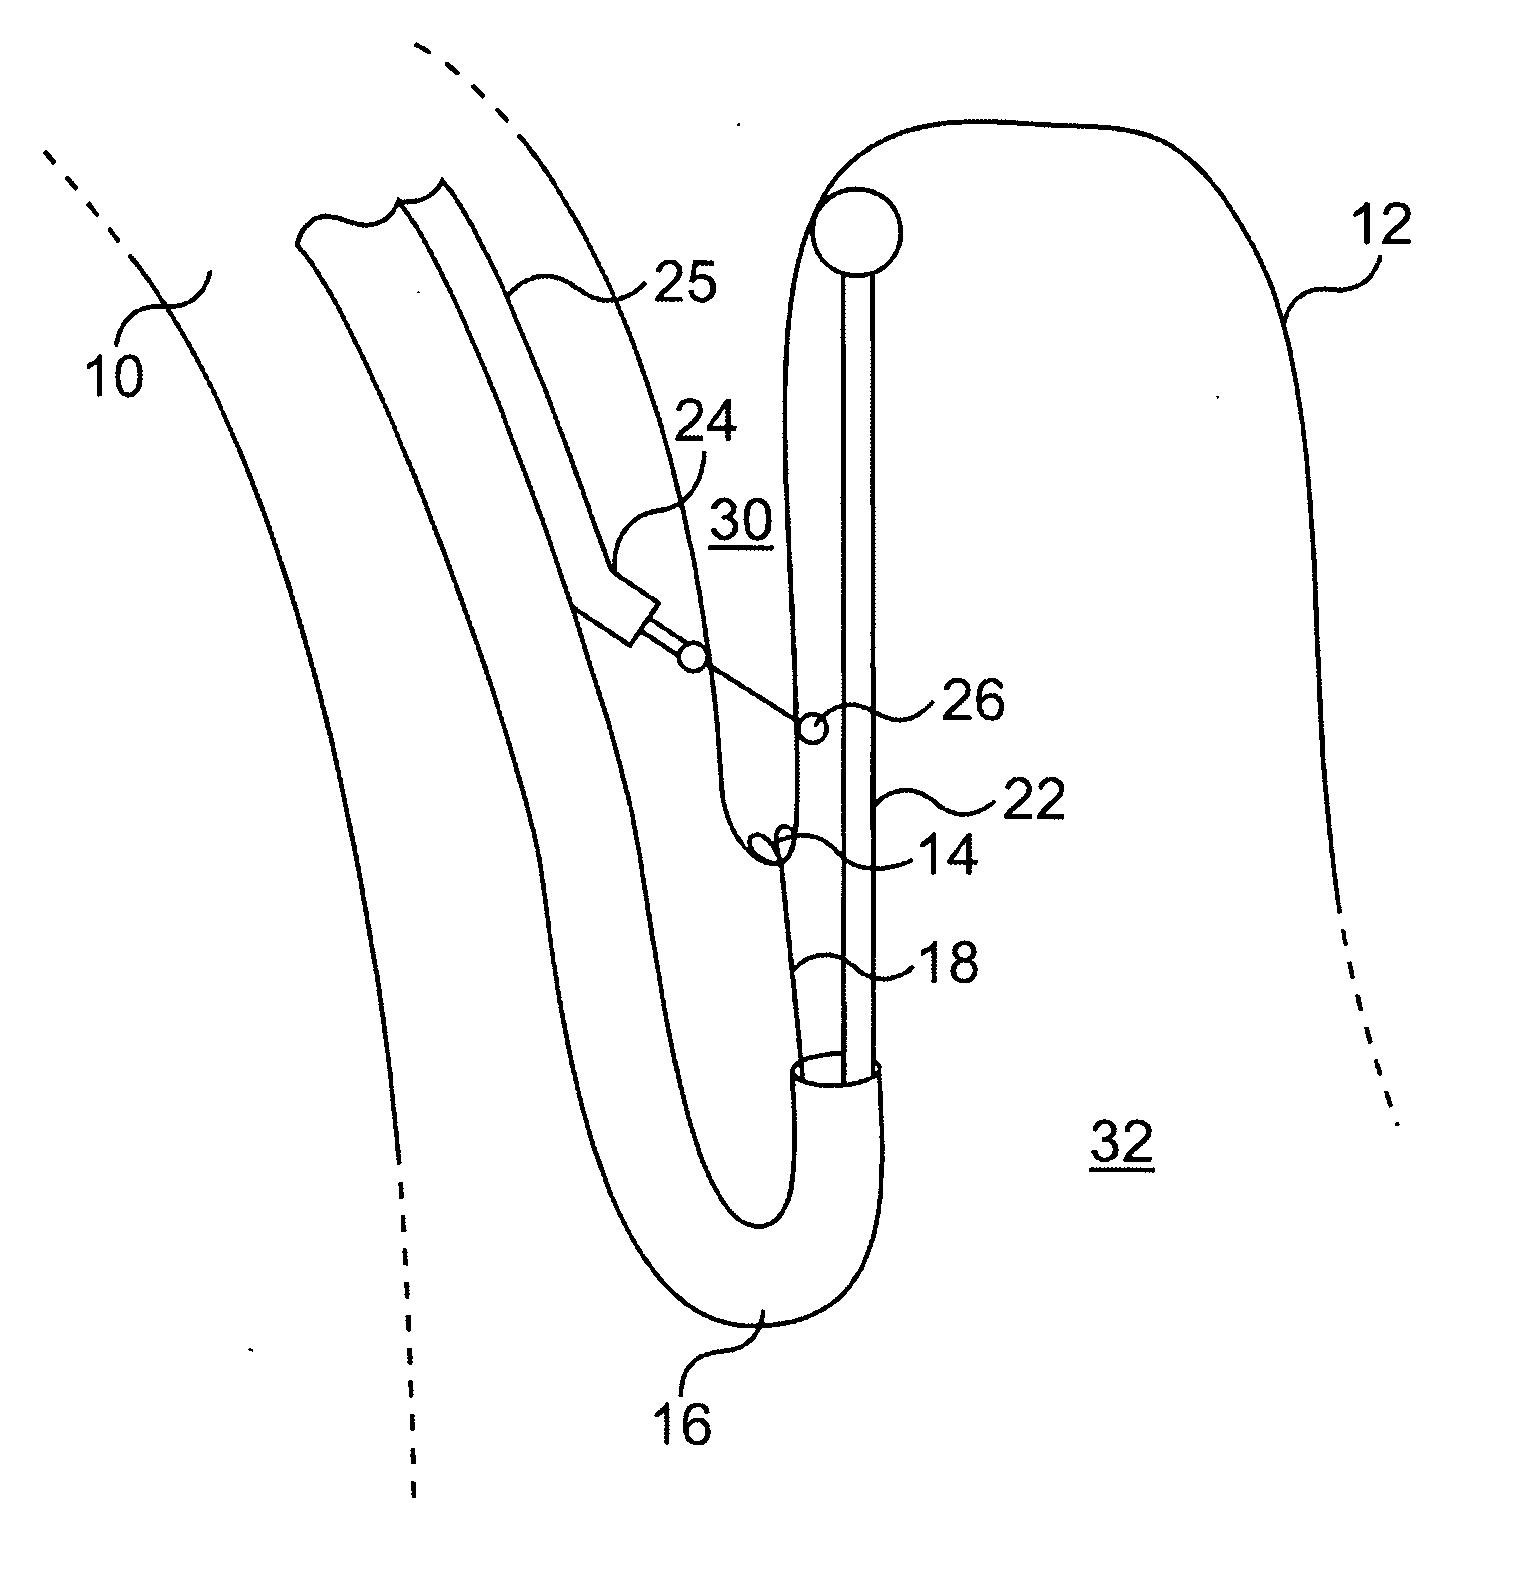 Method for performing endoluminal fundoplication and apparatus for use in the method